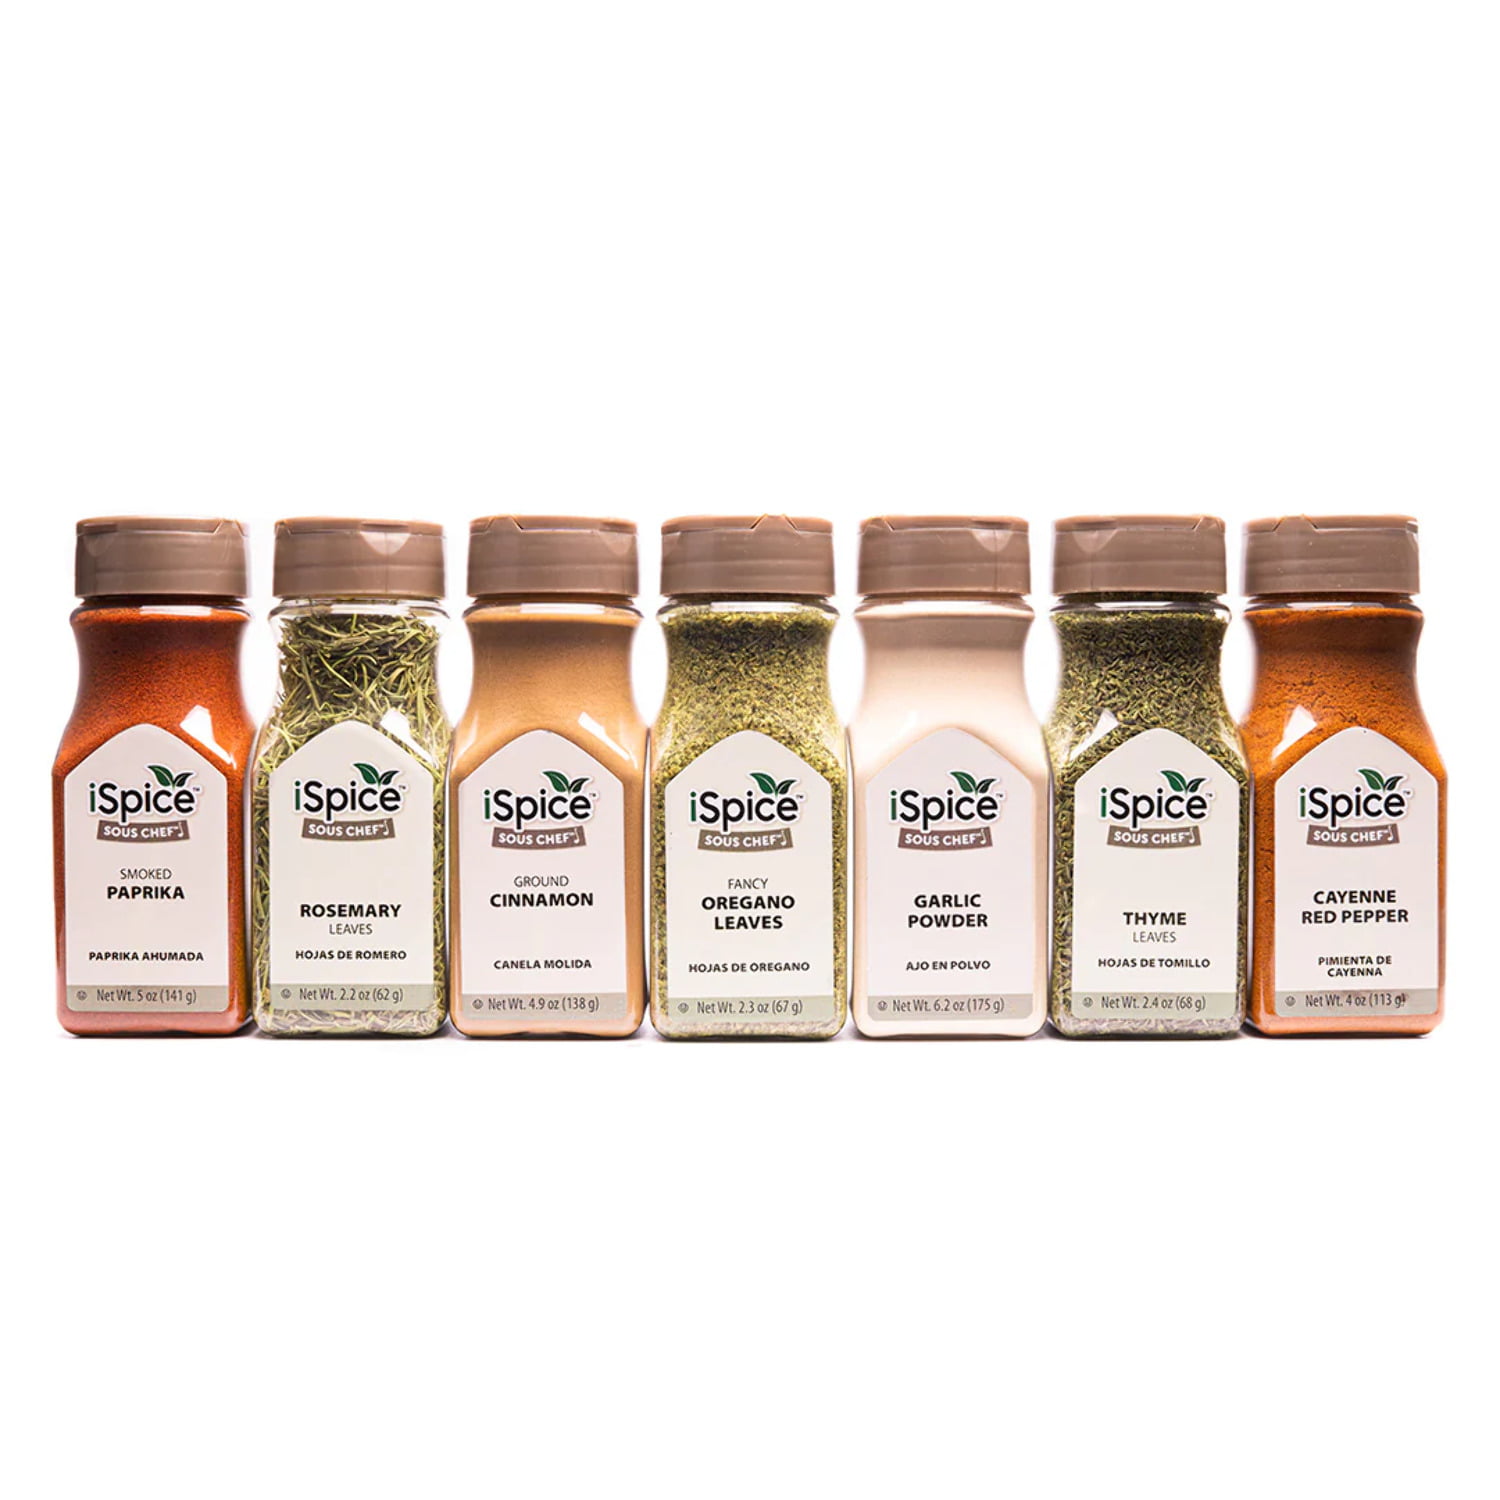 iSpice | 12 Pack of Spice and Herbs | Chef Naturelle | Mixed Spices & Seasonings Gift Set | Kosher